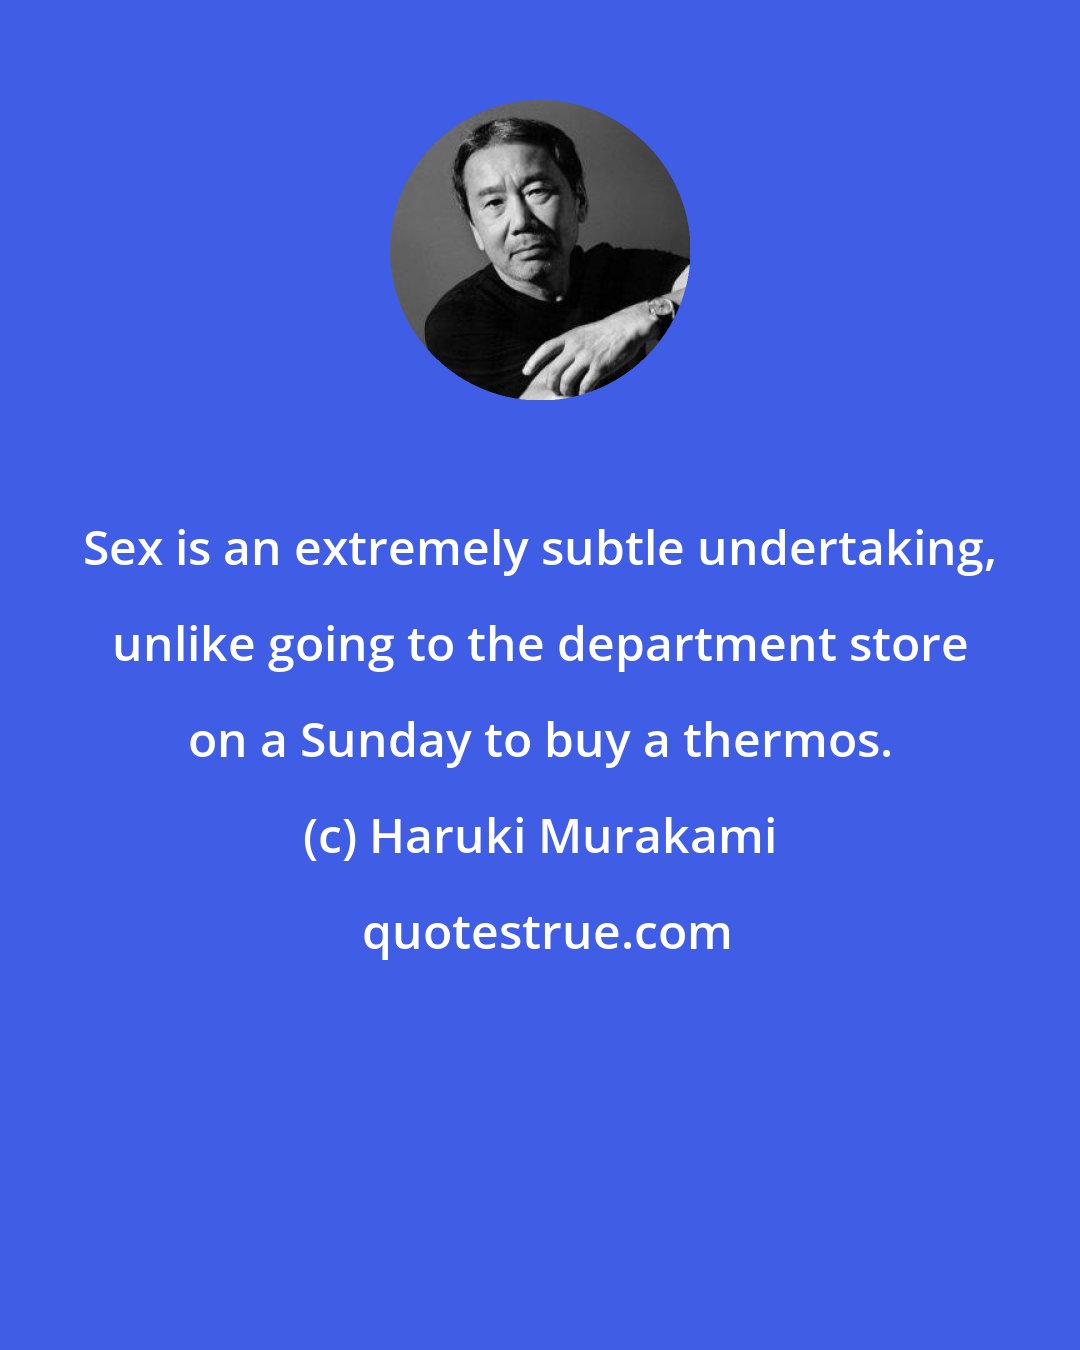 Haruki Murakami: Sex is an extremely subtle undertaking, unlike going to the department store on a Sunday to buy a thermos.